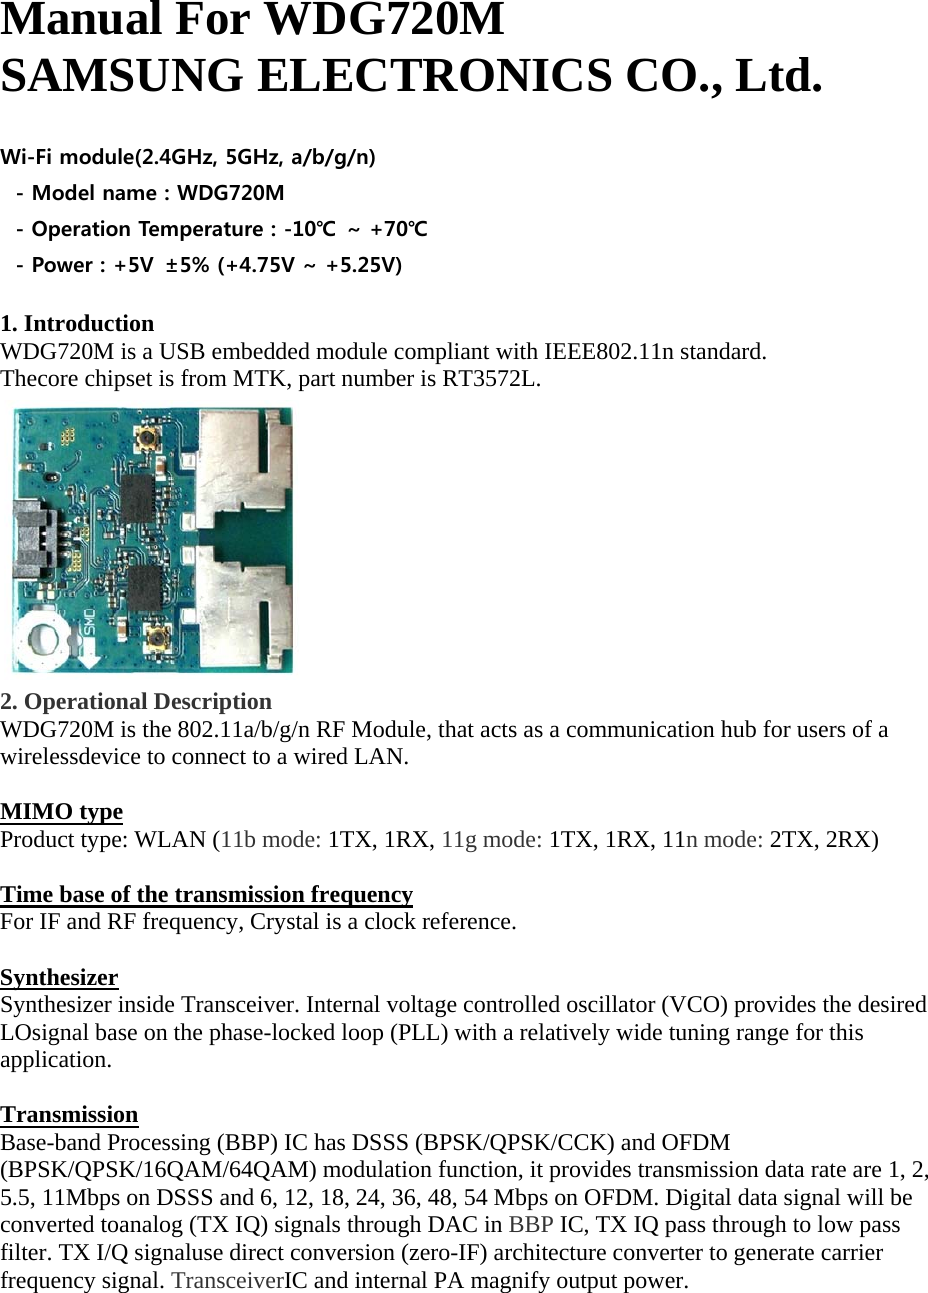 Manual For WDG720M SAMSUNG ELECTRONICS CO., Ltd.  Wi-Fi module(2.4GHz, 5GHz, a/b/g/n) - Model name : WDG720M - Operation Temperature : -10℃ ~ +70℃ - Power : +5V  ±5% (+4.75V ~ +5.25V)  1. Introduction WDG720M is a USB embedded module compliant with IEEE802.11n standard. Thecore chipset is from MTK, part number is RT3572L.  2. Operational Description WDG720M is the 802.11a/b/g/n RF Module, that acts as a communication hub for users of a wirelessdevice to connect to a wired LAN.    MIMO type Product type: WLAN (11b mode: 1TX, 1RX, 11g mode: 1TX, 1RX, 11n mode: 2TX, 2RX)  Time base of the transmission frequency For IF and RF frequency, Crystal is a clock reference.  Synthesizer Synthesizer inside Transceiver. Internal voltage controlled oscillator (VCO) provides the desired LOsignal base on the phase-locked loop (PLL) with a relatively wide tuning range for this application.  Transmission Base-band Processing (BBP) IC has DSSS (BPSK/QPSK/CCK) and OFDM (BPSK/QPSK/16QAM/64QAM) modulation function, it provides transmission data rate are 1, 2, 5.5, 11Mbps on DSSS and 6, 12, 18, 24, 36, 48, 54 Mbps on OFDM. Digital data signal will be converted toanalog (TX IQ) signals through DAC in BBP IC, TX IQ pass through to low pass filter. TX I/Q signaluse direct conversion (zero-IF) architecture converter to generate carrier frequency signal. TransceiverIC and internal PA magnify output power.   